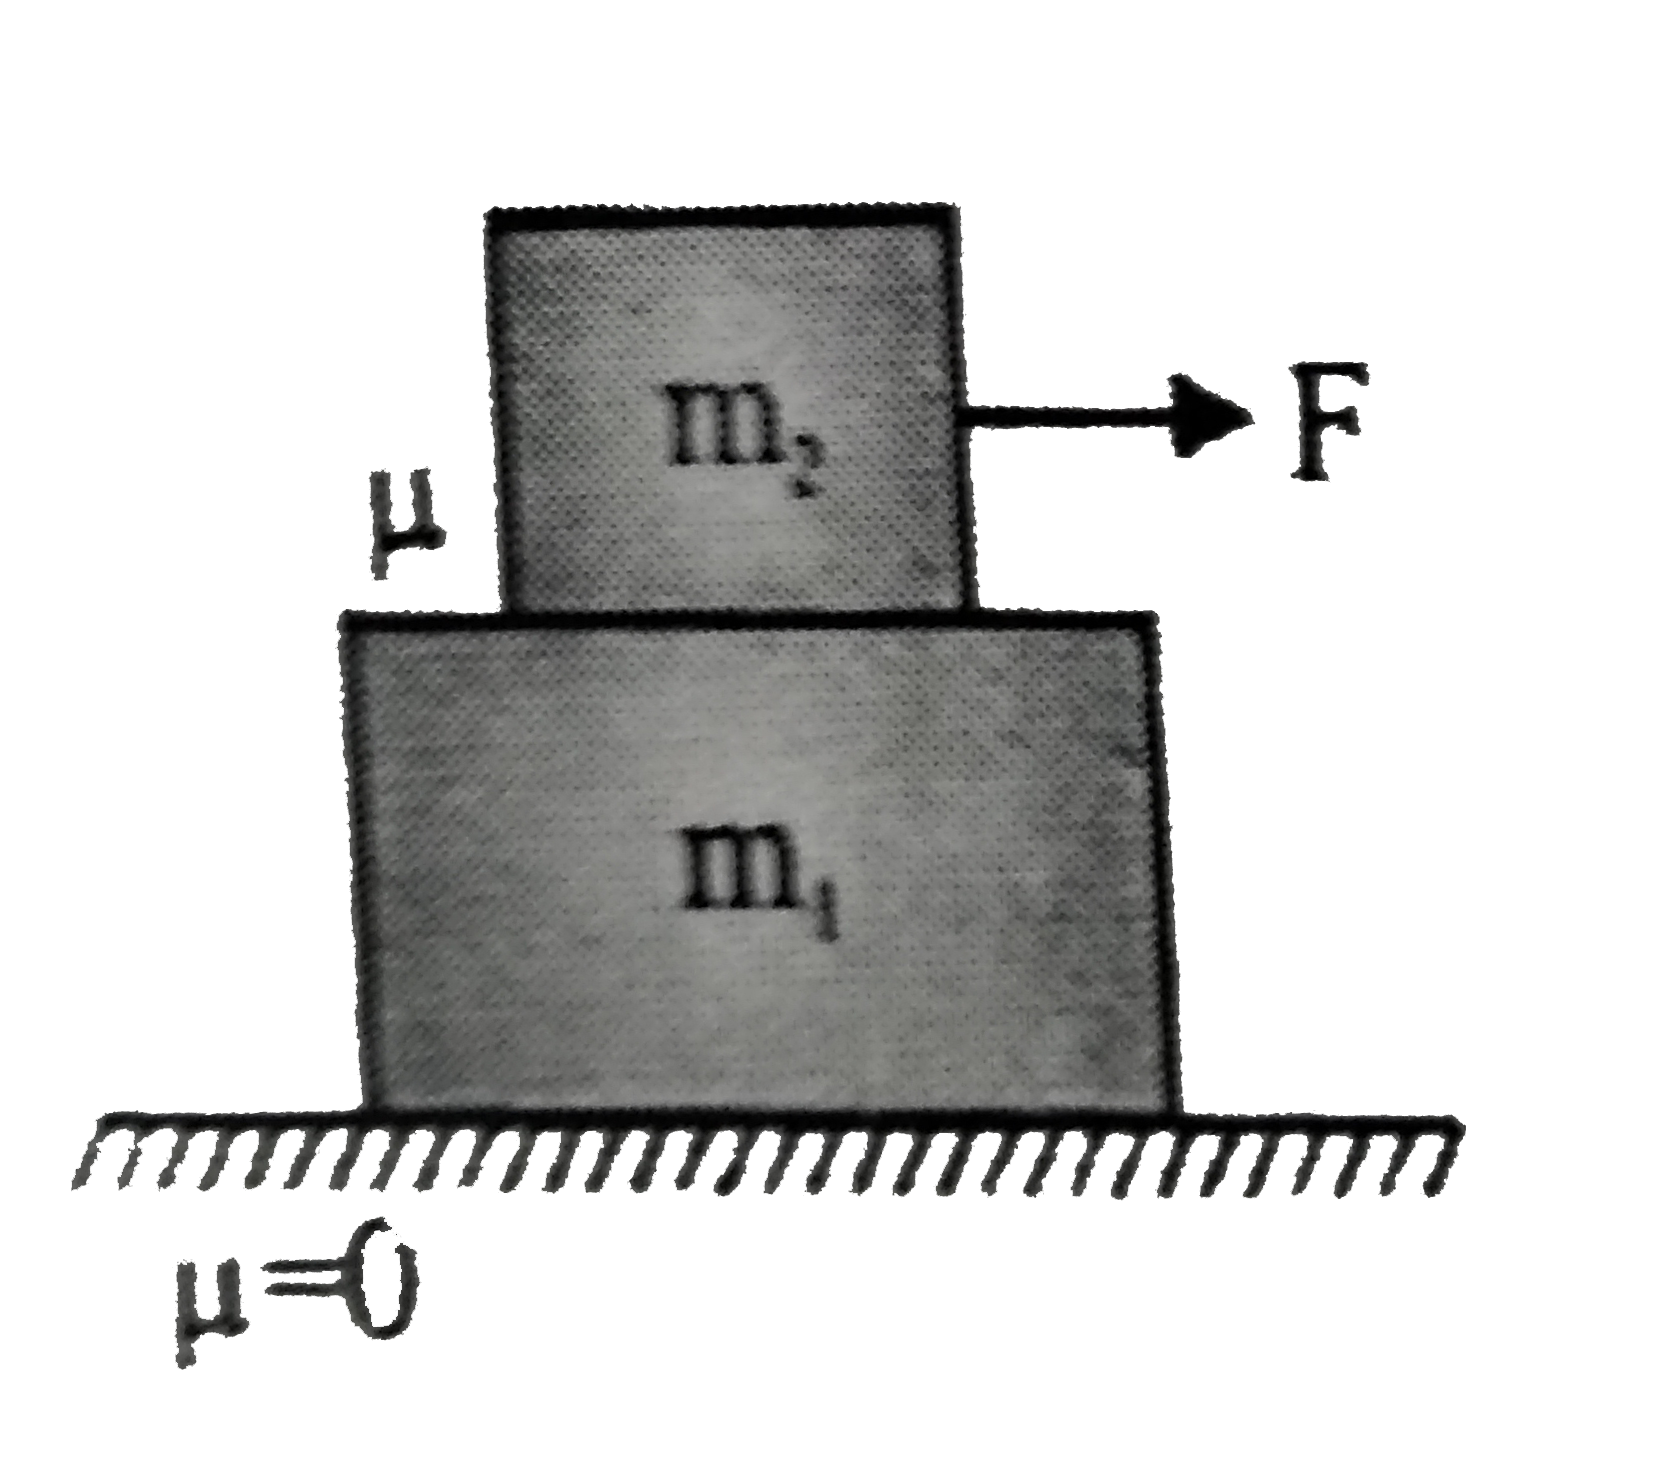 When force F applied on m(2) and there is no friction between m(1) and surface and the coefficient of friction between m(1) and m(2) is mu… What should be the minimum value of F so that there is no relative motion between m(1) and m(2)